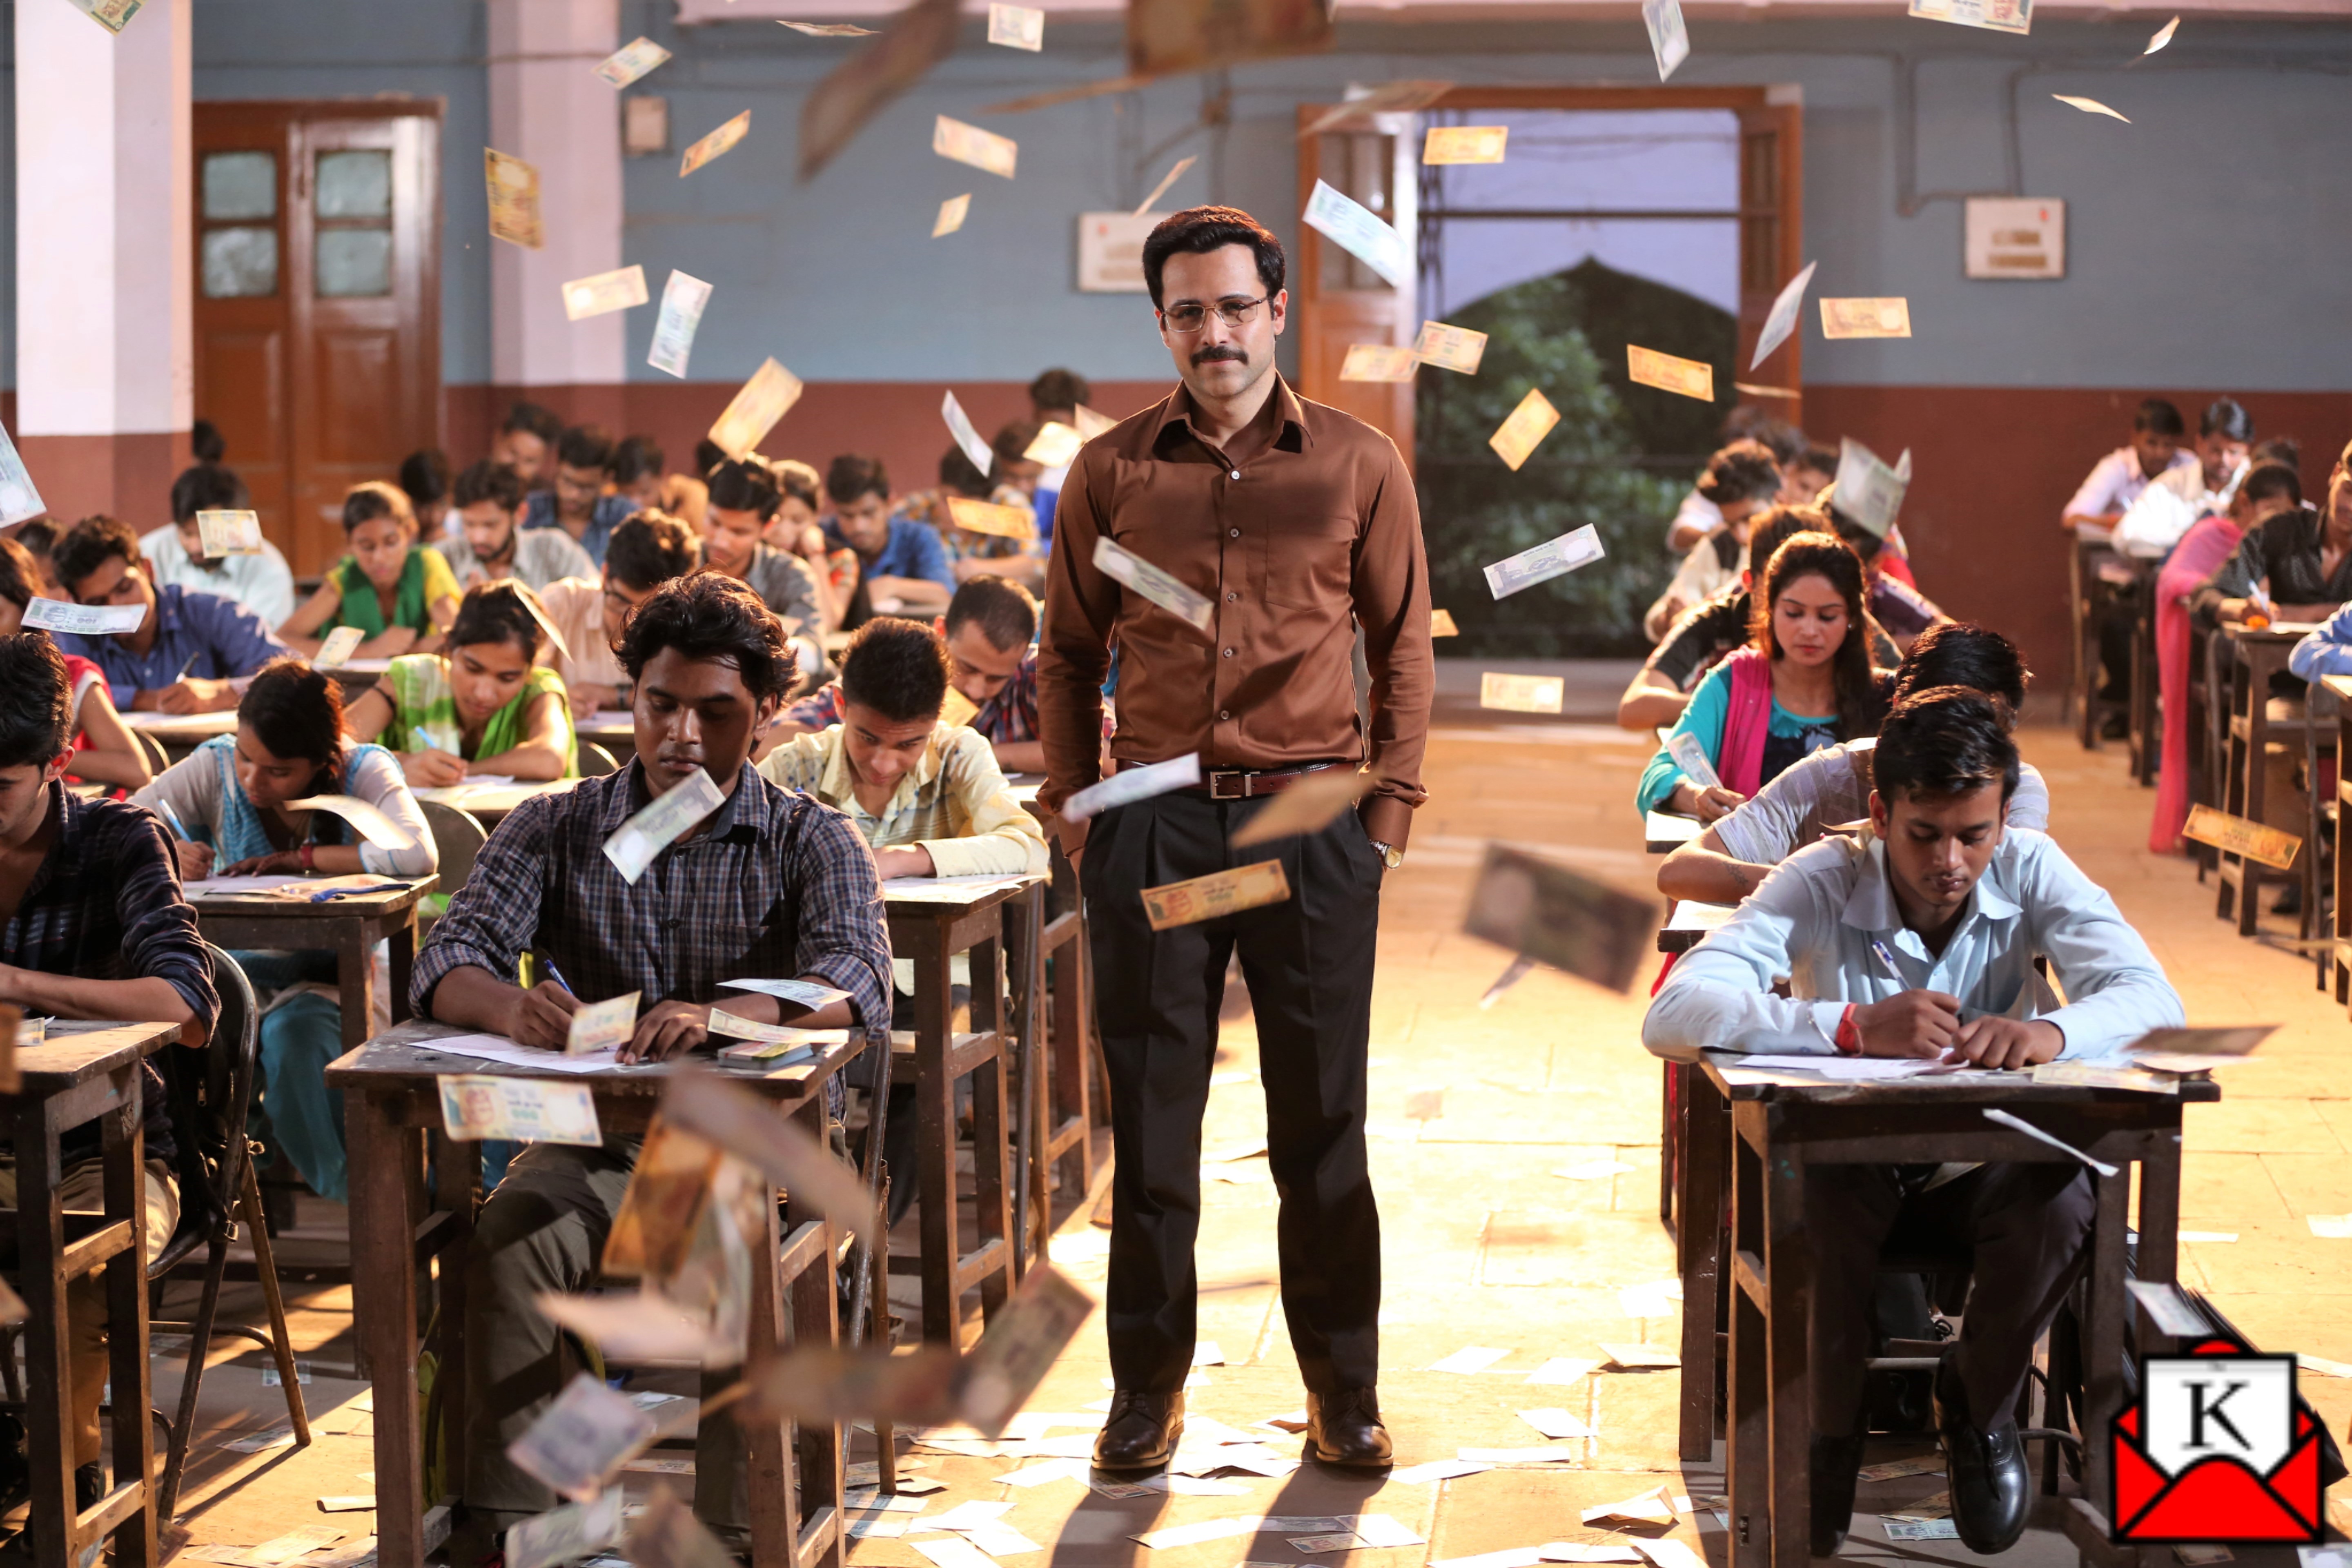 Video Teaser of Cheat India Released; Film to Highlight Malpractices in India’s Education System